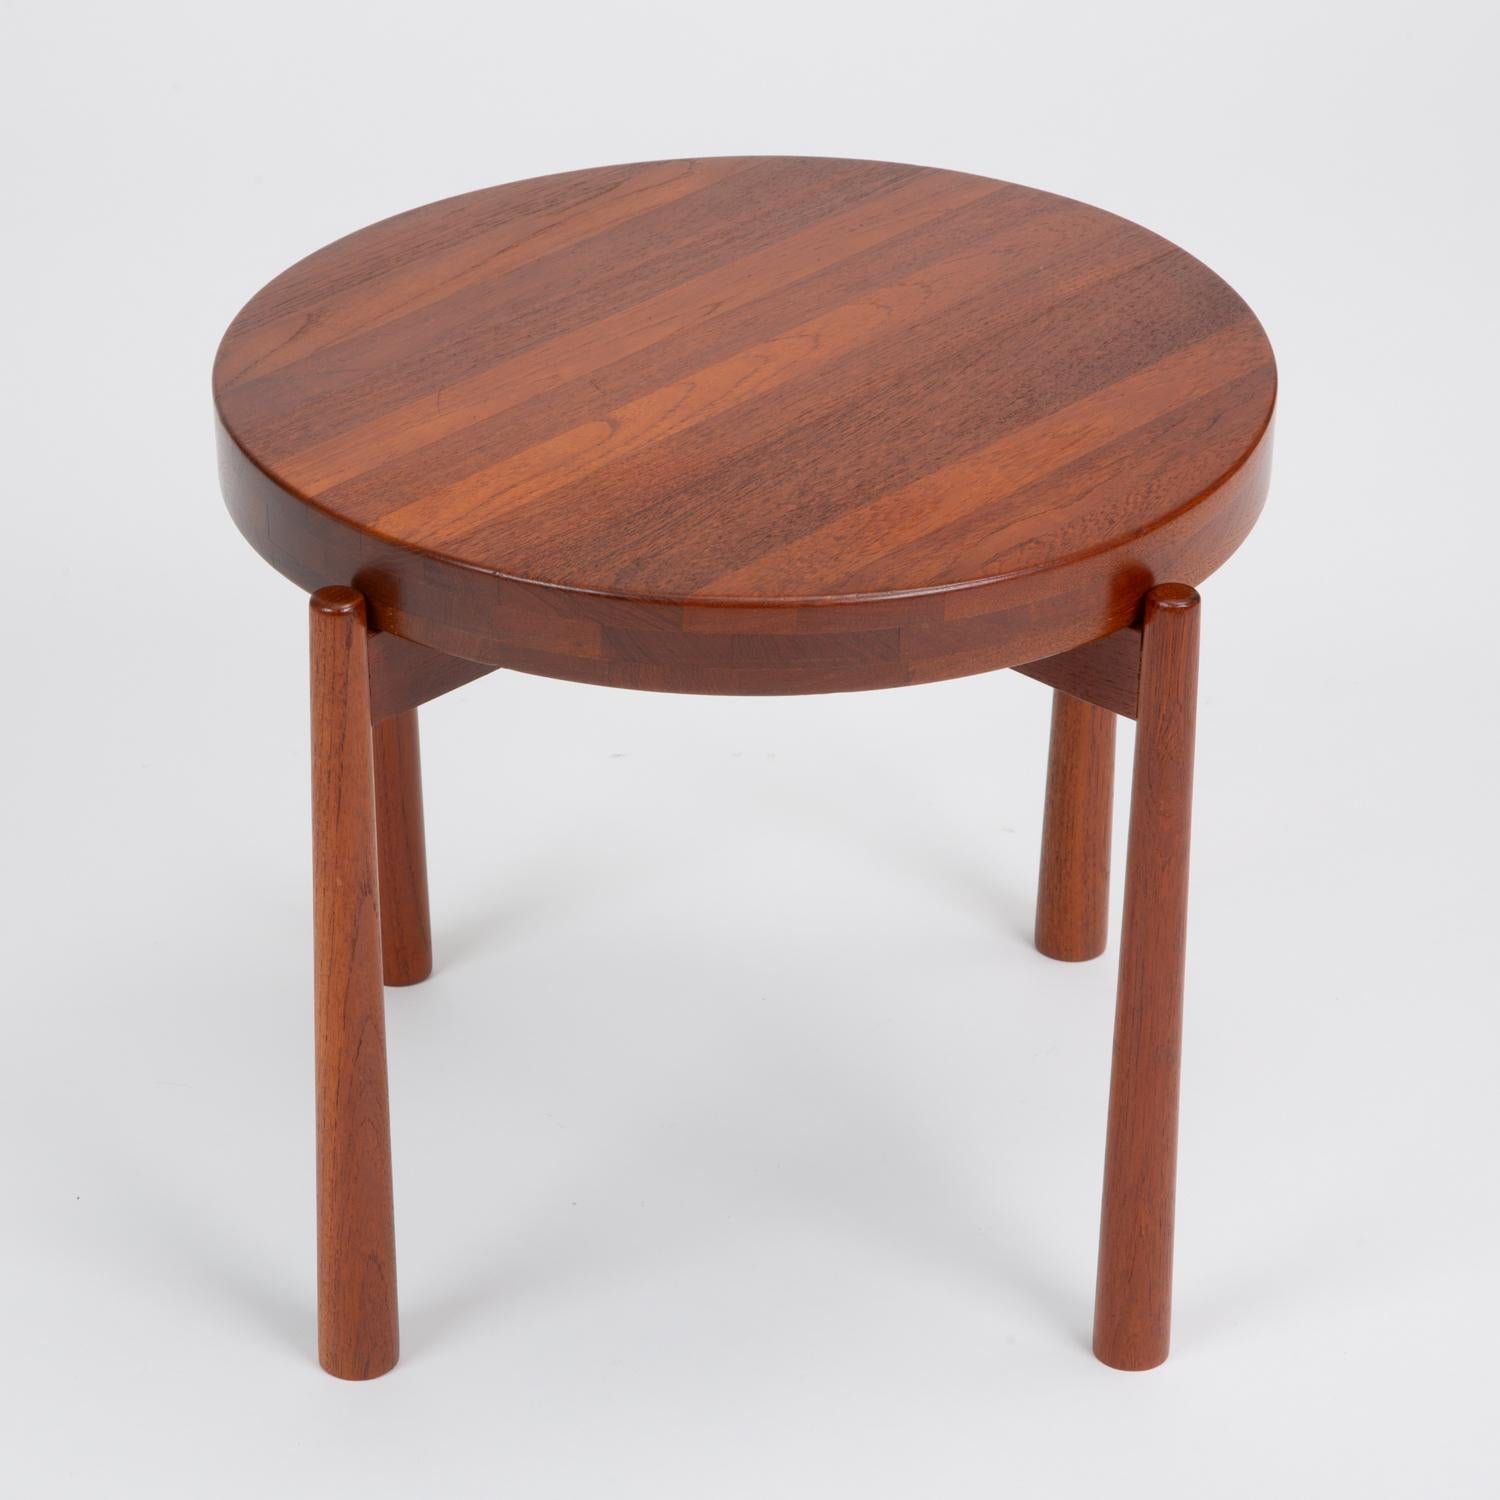 A clever “flip top” tray table design by DUX of Sweden. A stand on four flared legs holds a solid teak wooden tray, fully finished on both sides for reversible use — flat for use as a traditional table, and concave for a bowl or tray. The concave